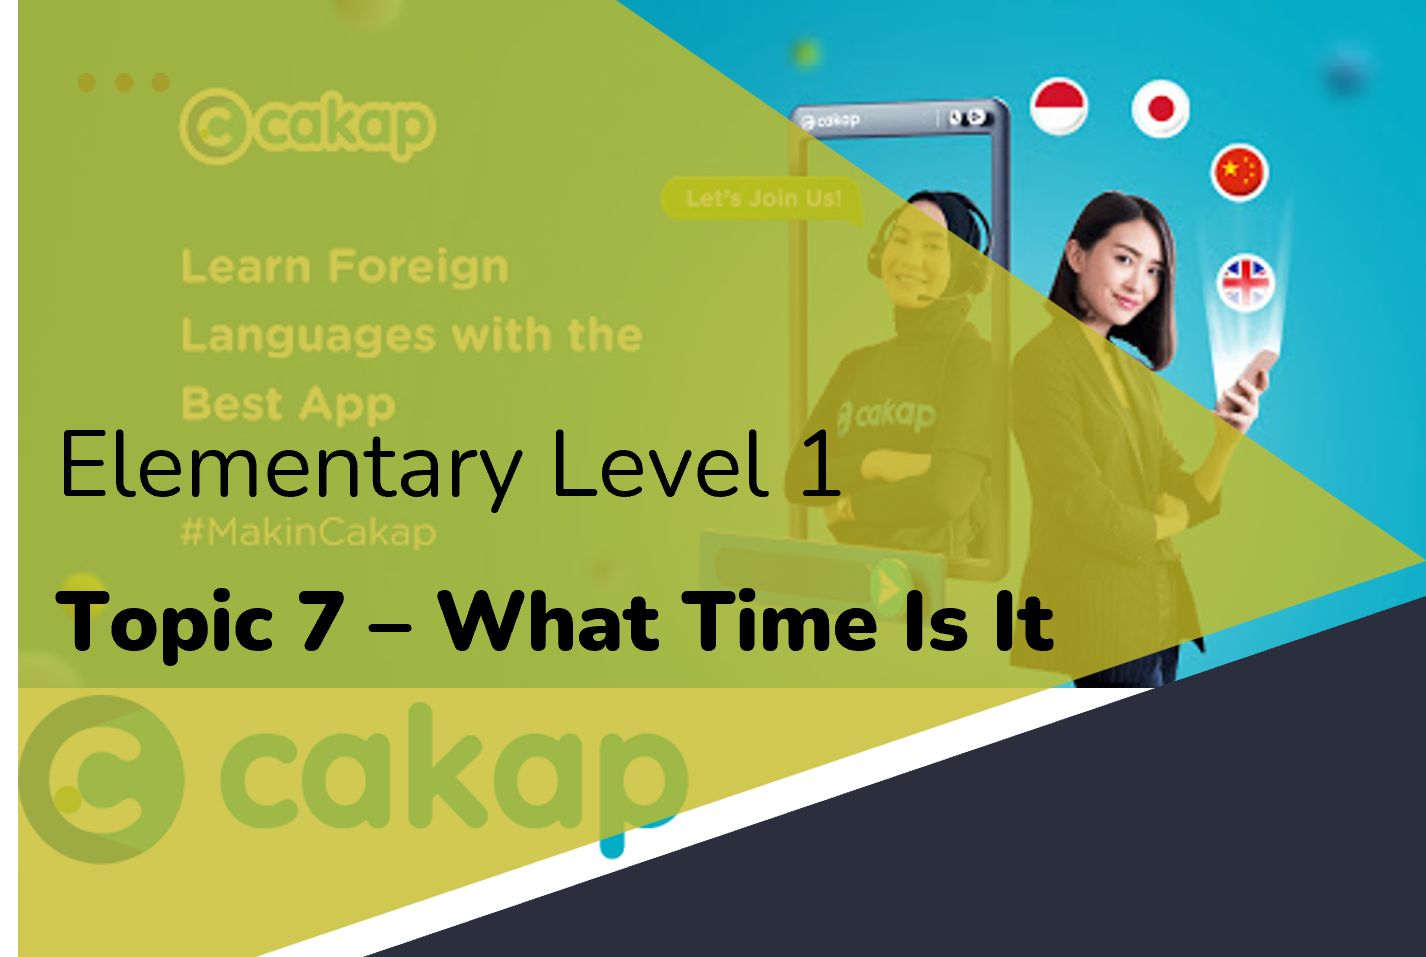 Elementary 1: Topic 7 - What Time Is It